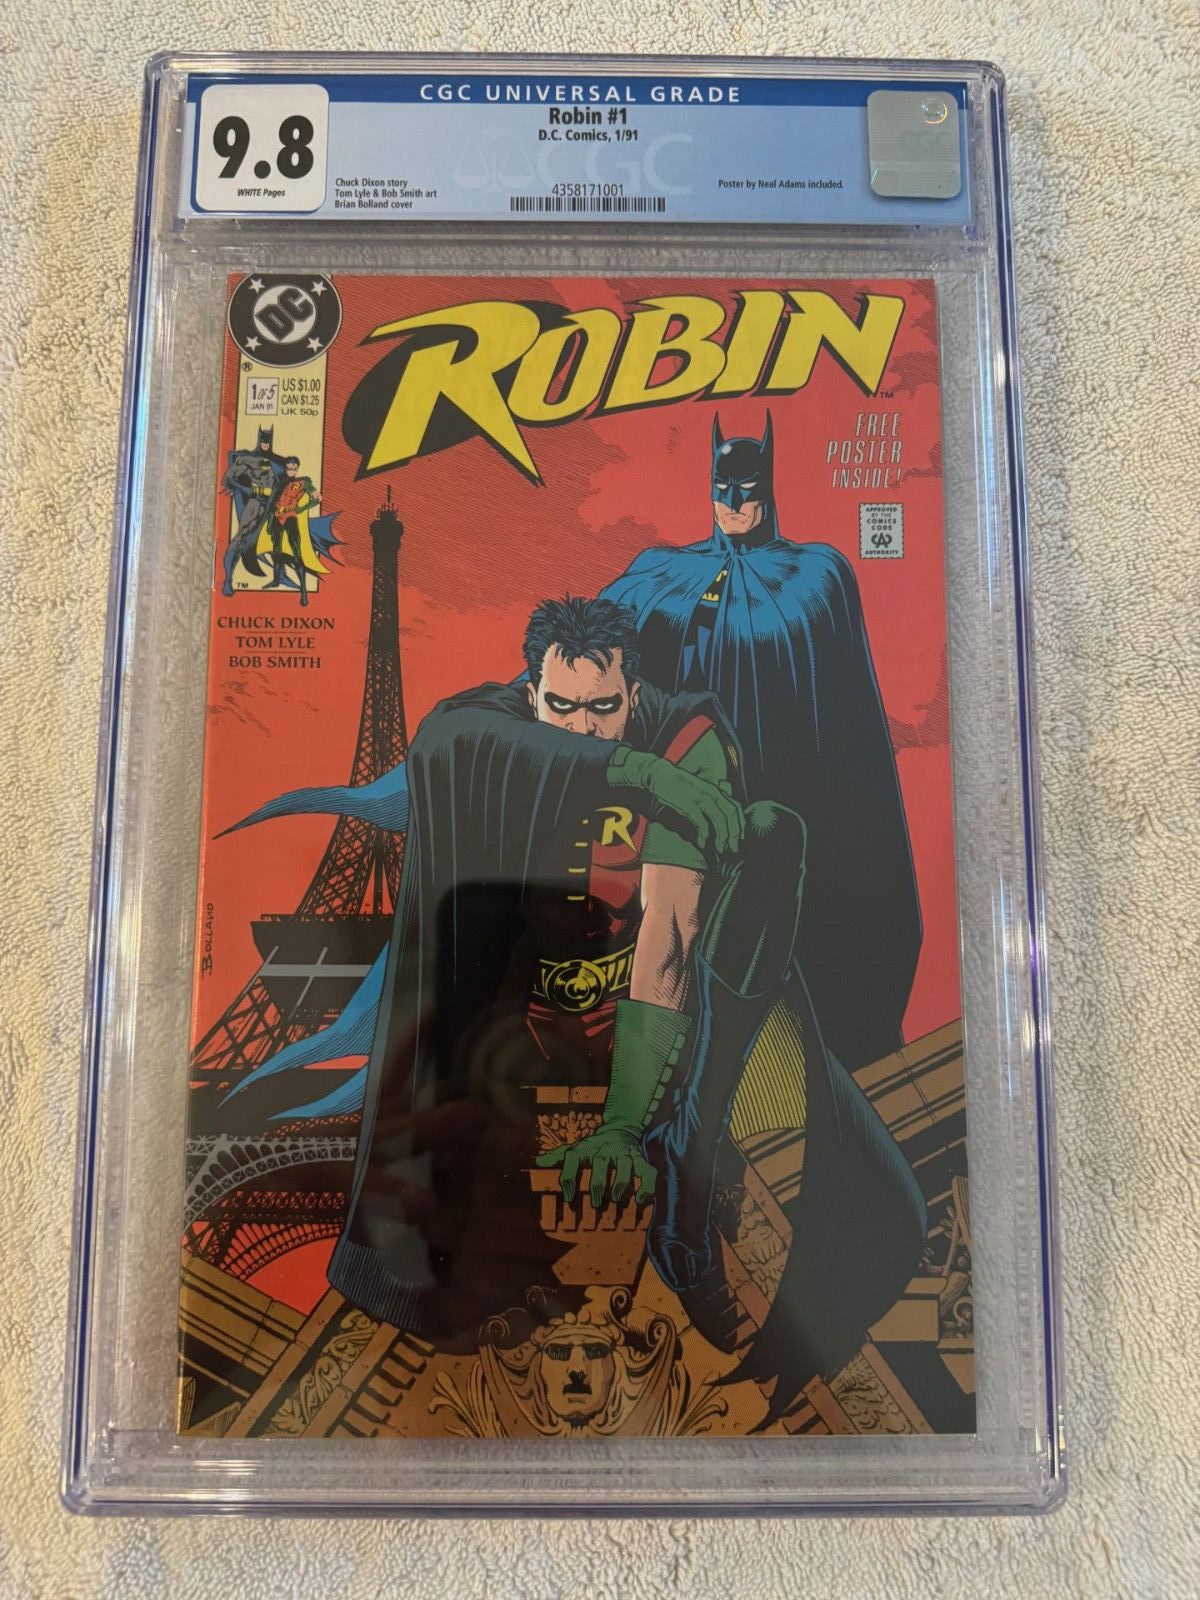 Robin #1 - CGC 9.8 - White Pages - DC Comics 1991